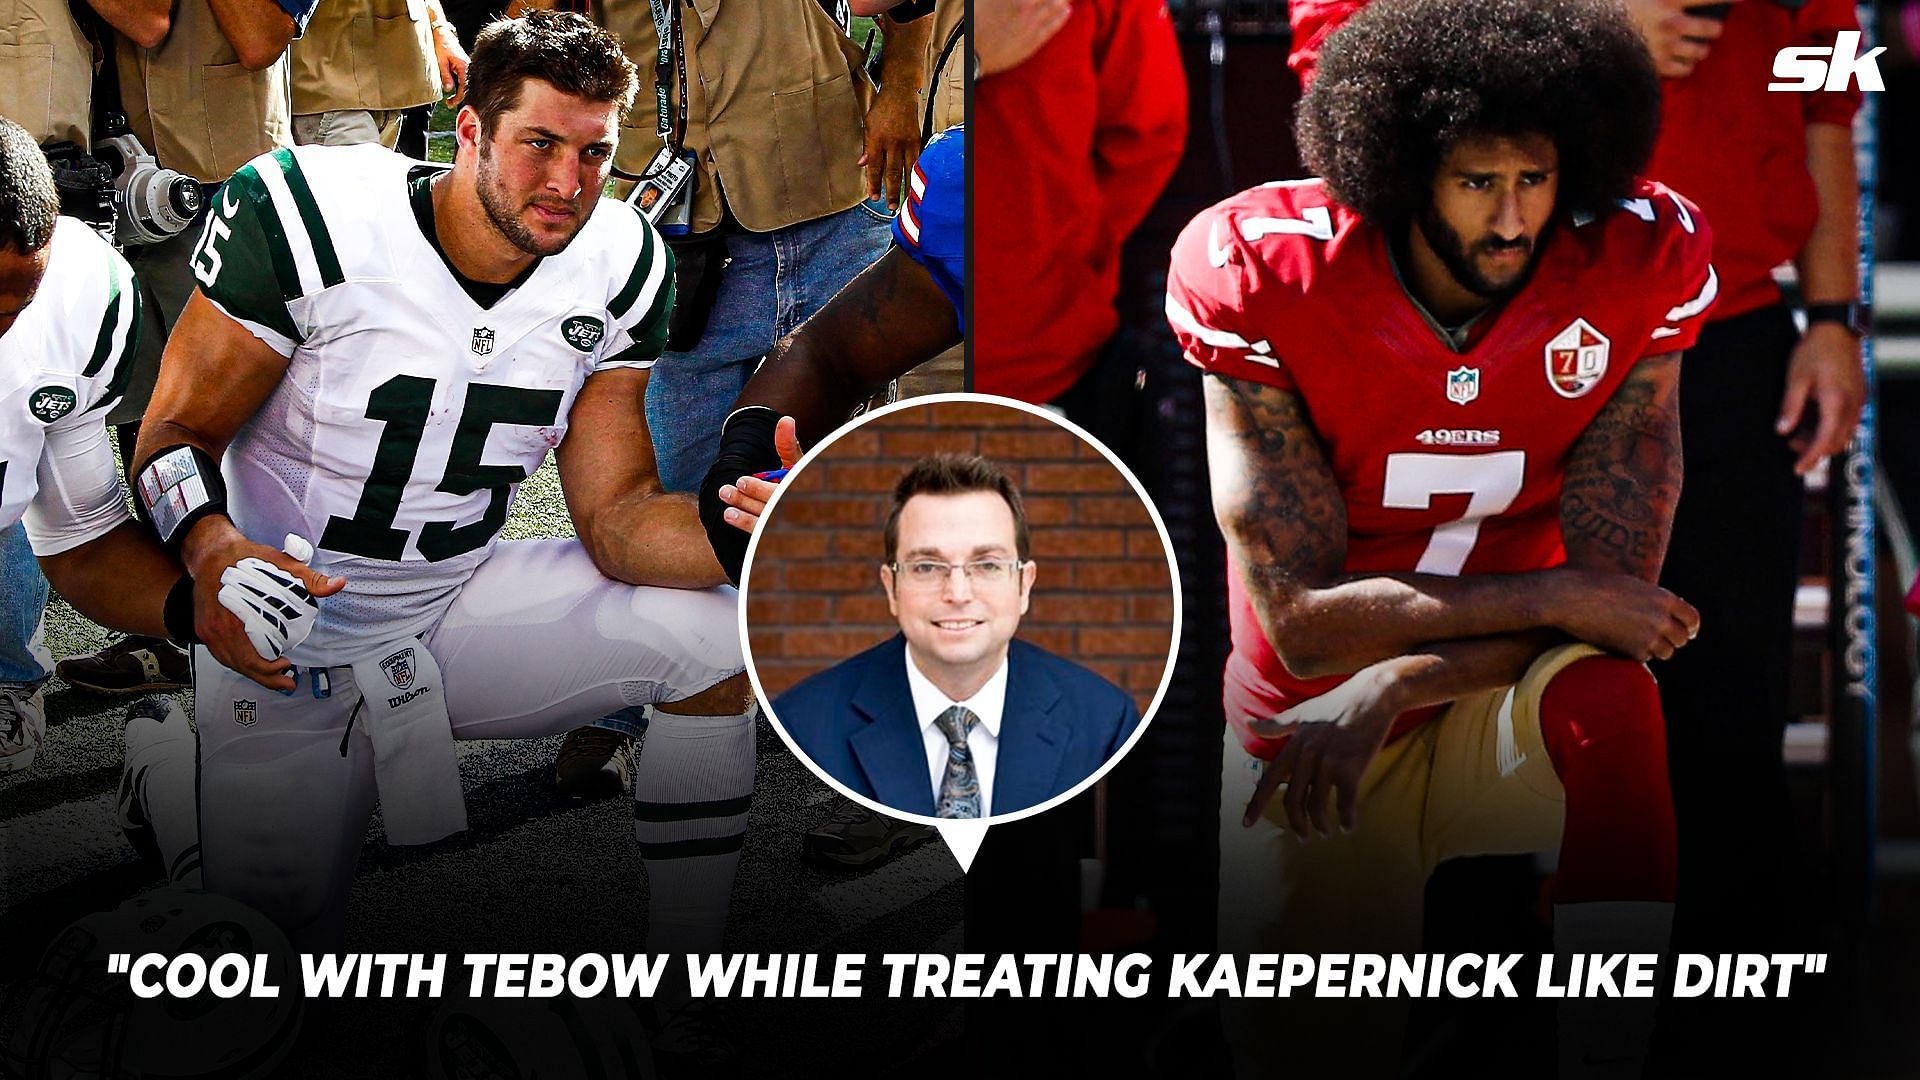 NFL has been accused of following double standards in dealing with Tim Tebow and Colin Kaepernick